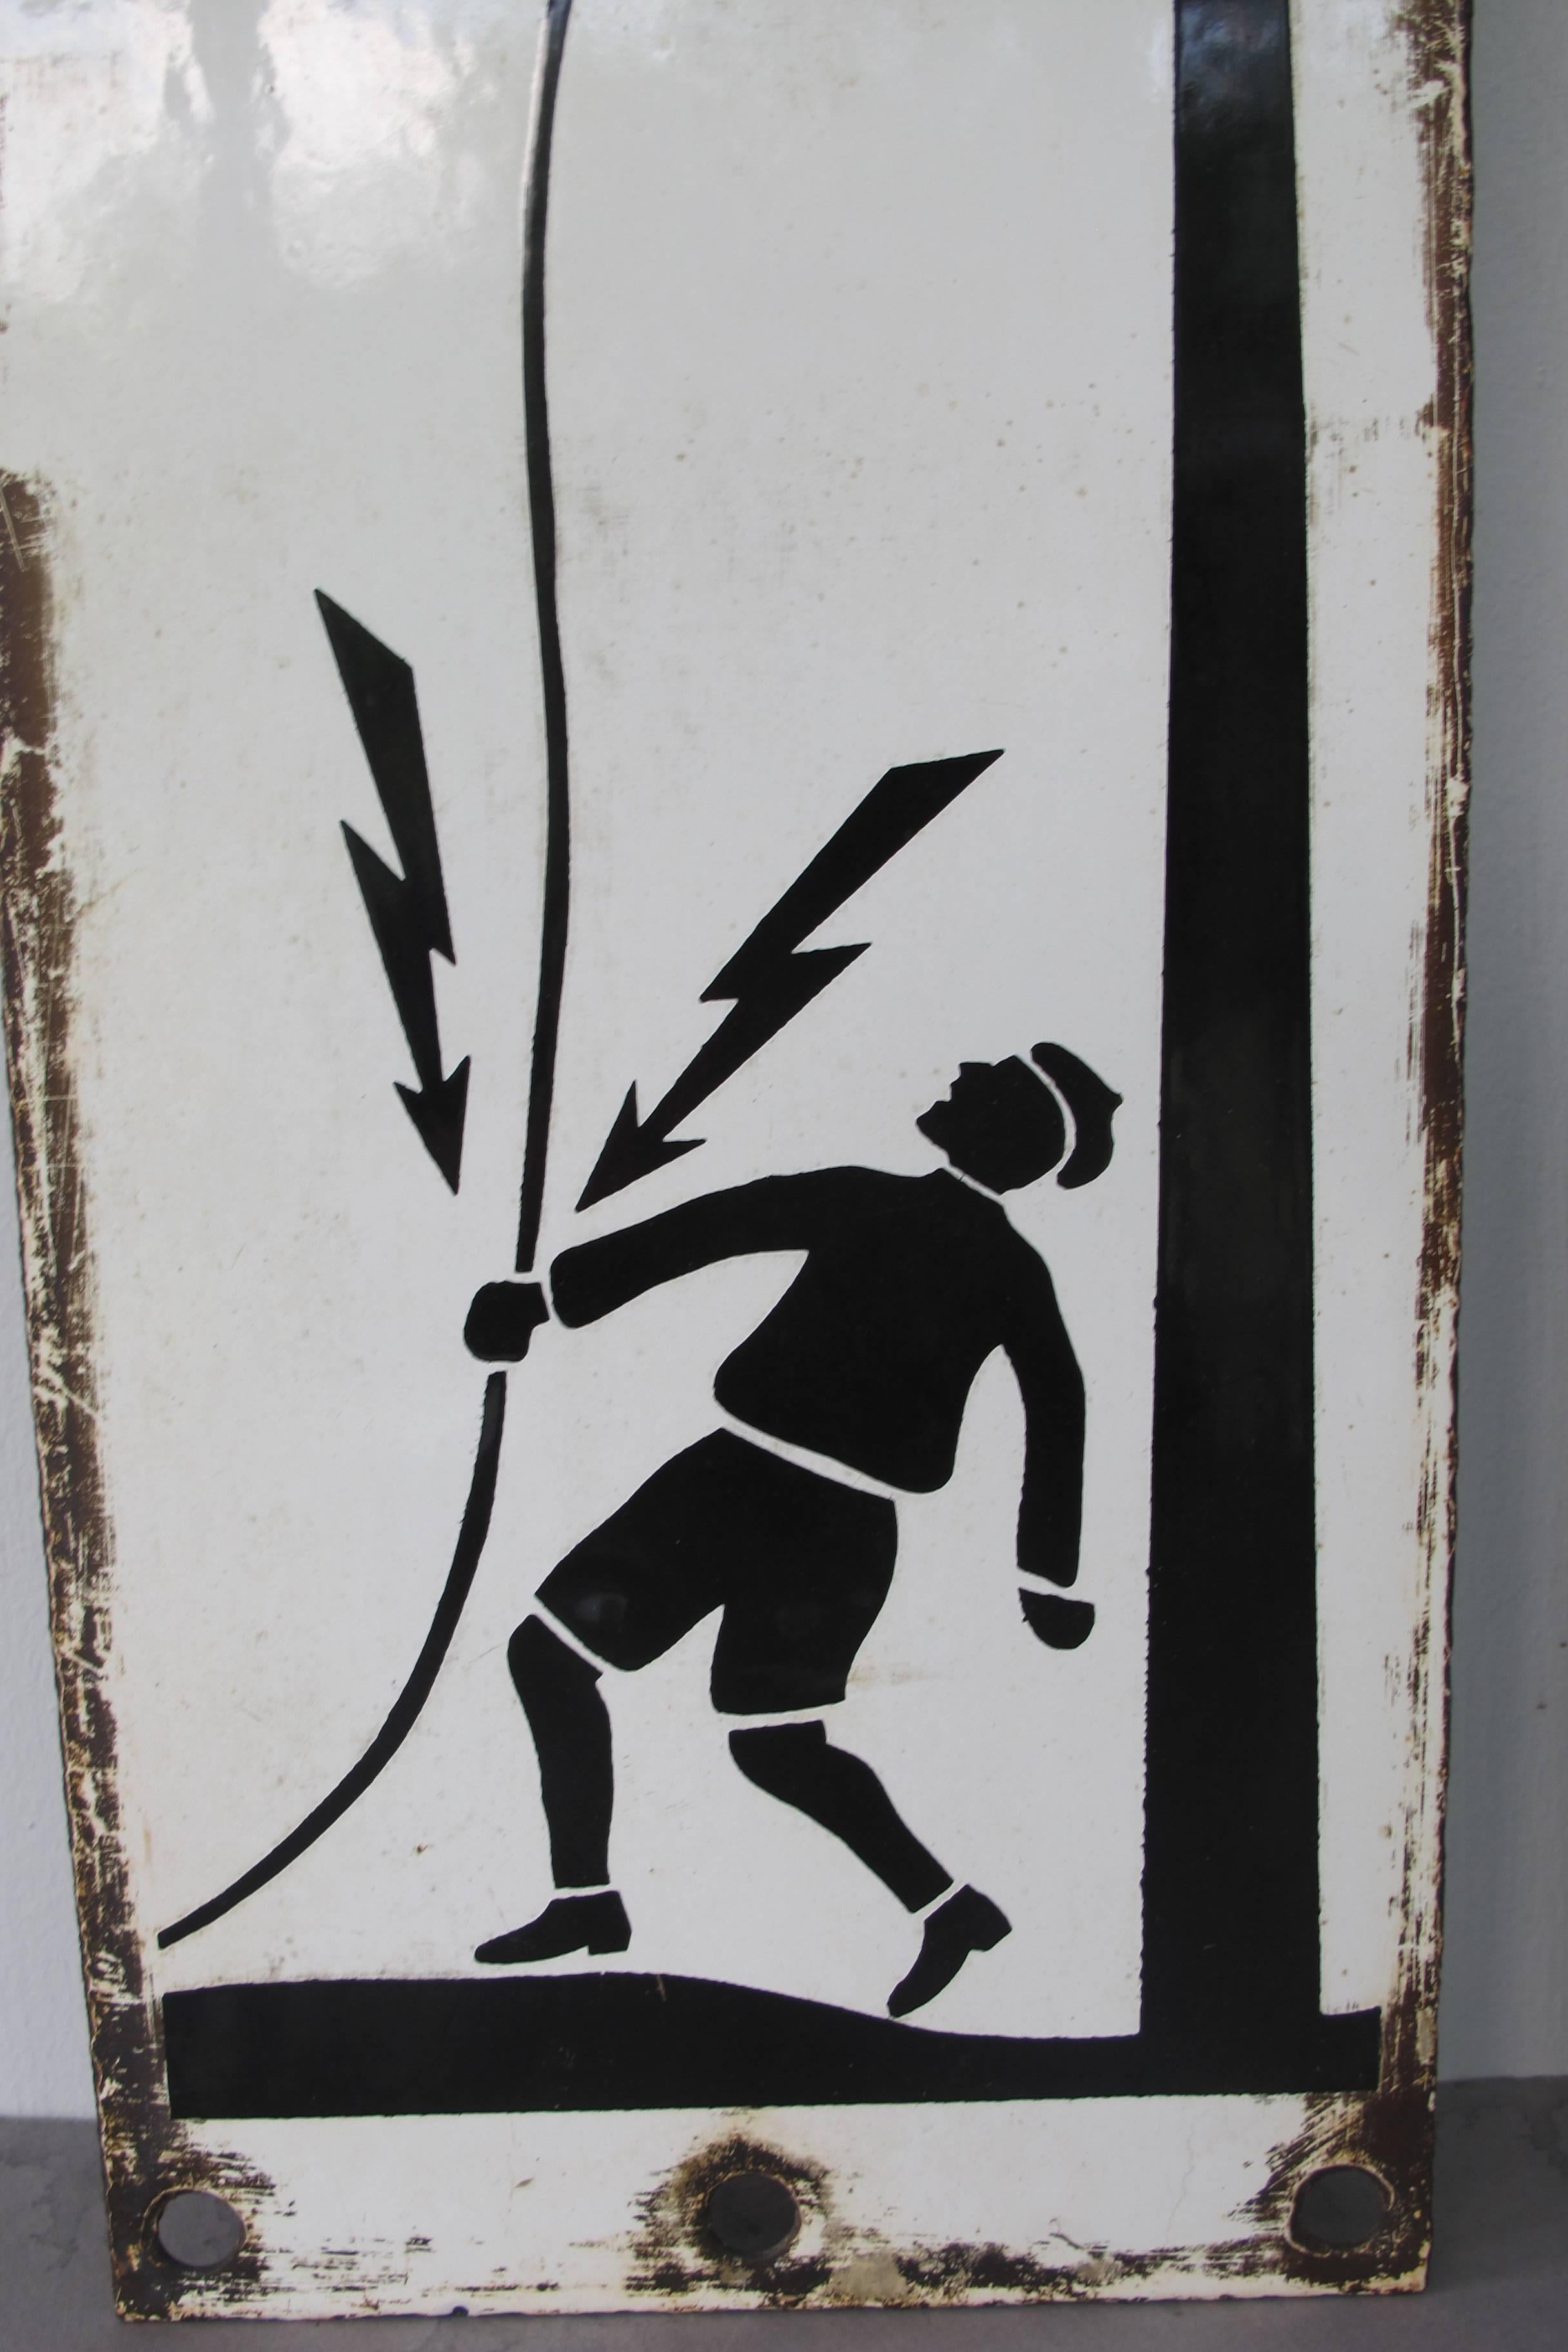 Two enameled iron warning signs with images of man grabbing a downed electrical wire with bold black skull and crossbones above. The quality of the graphic images blows me away. The signs have holes at the top and bottom for attachment probably to a